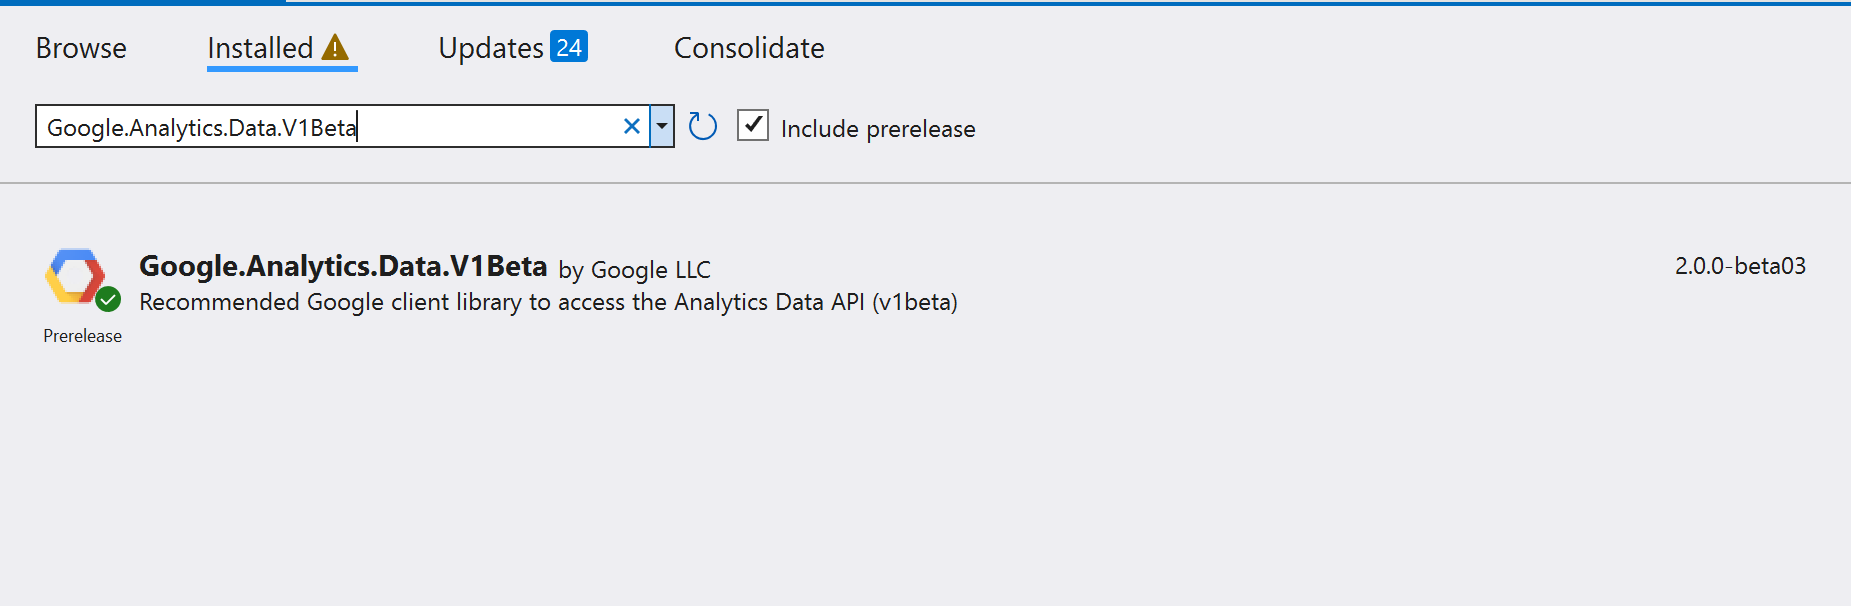 How to get page views and events data from GA4 in .NET